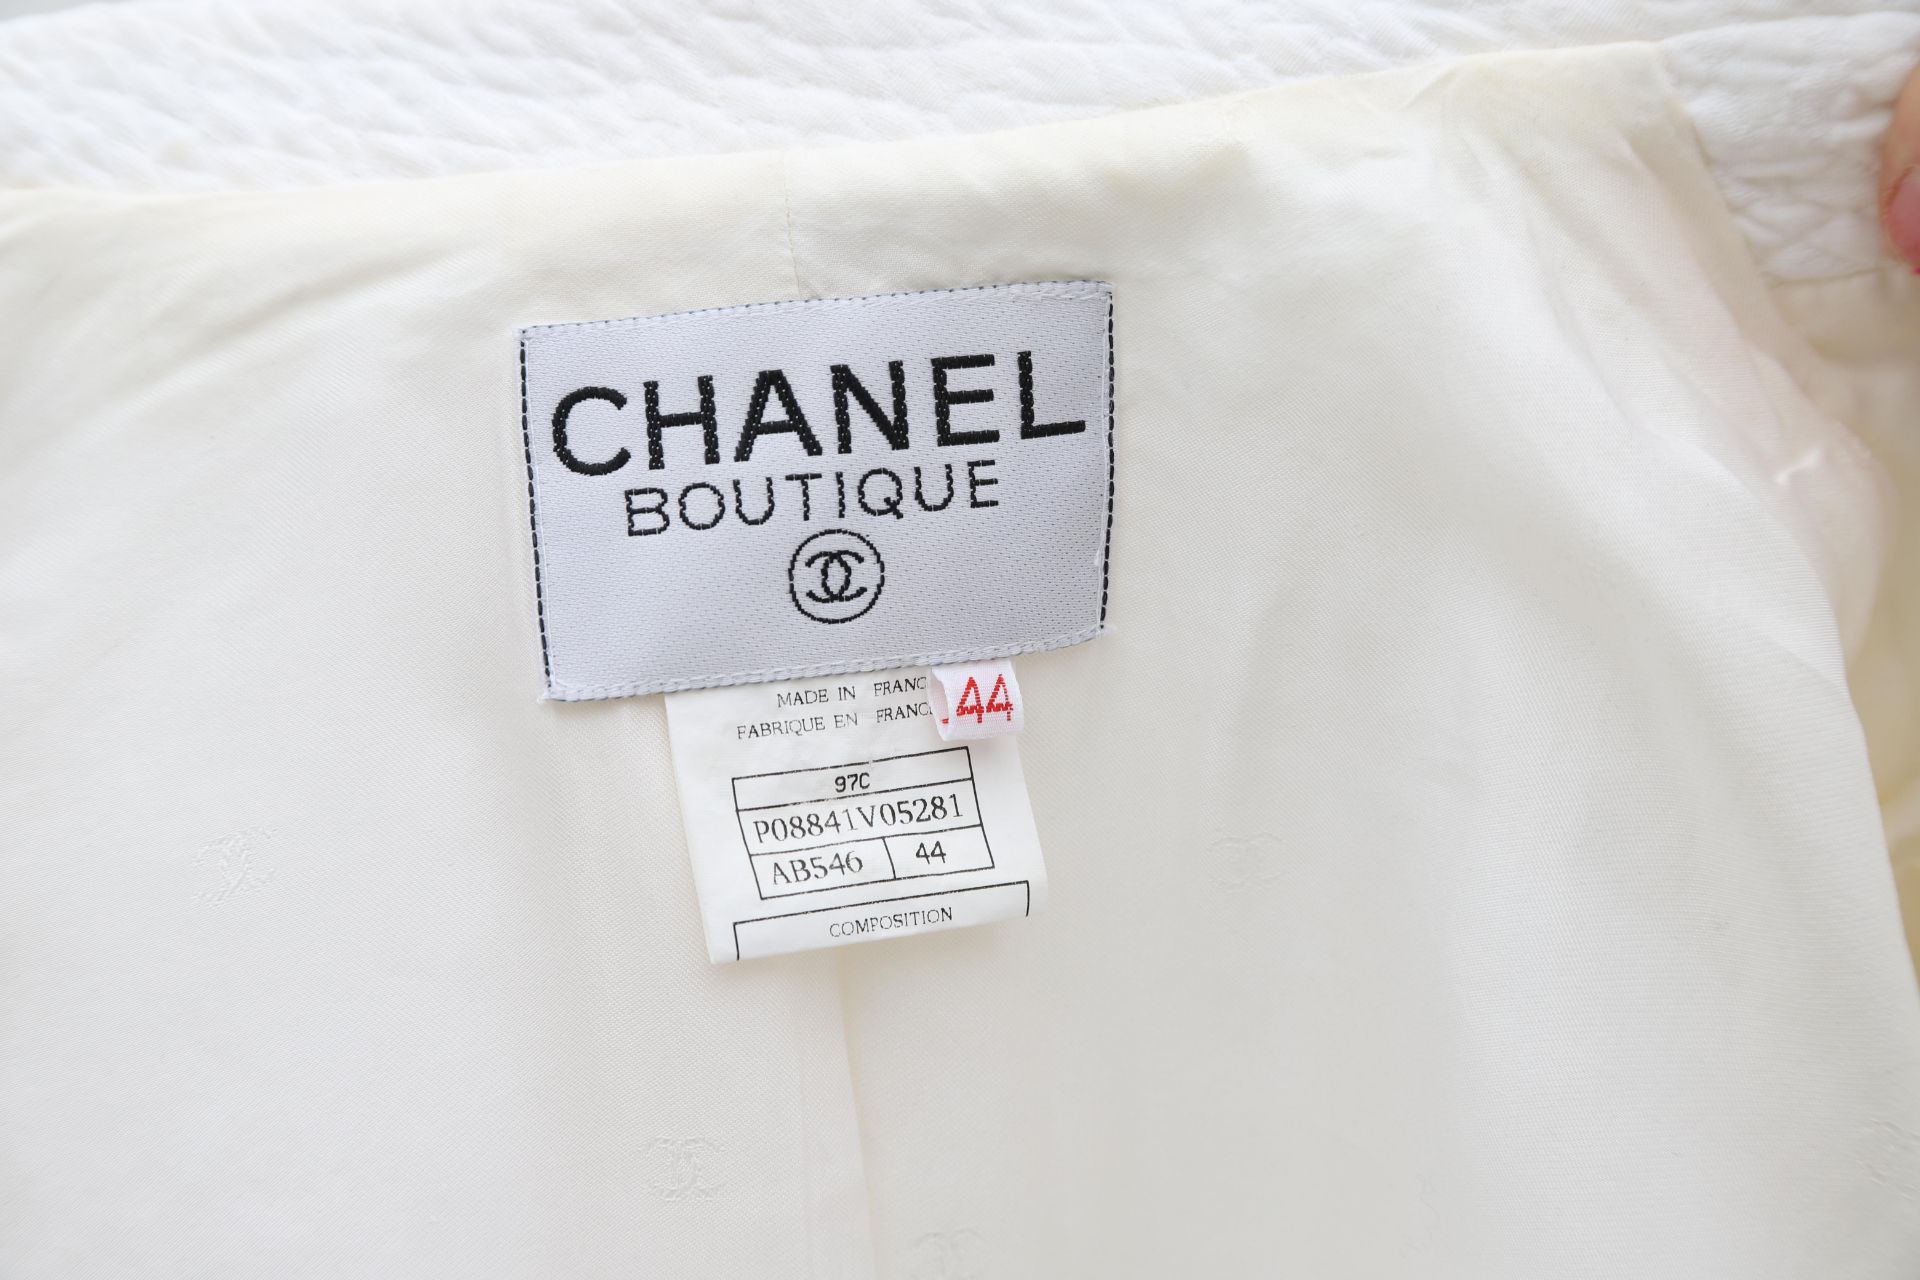 Chanel Boutique white jacket with a quilted pattern. The jacket has two external pockets, a - Image 2 of 6